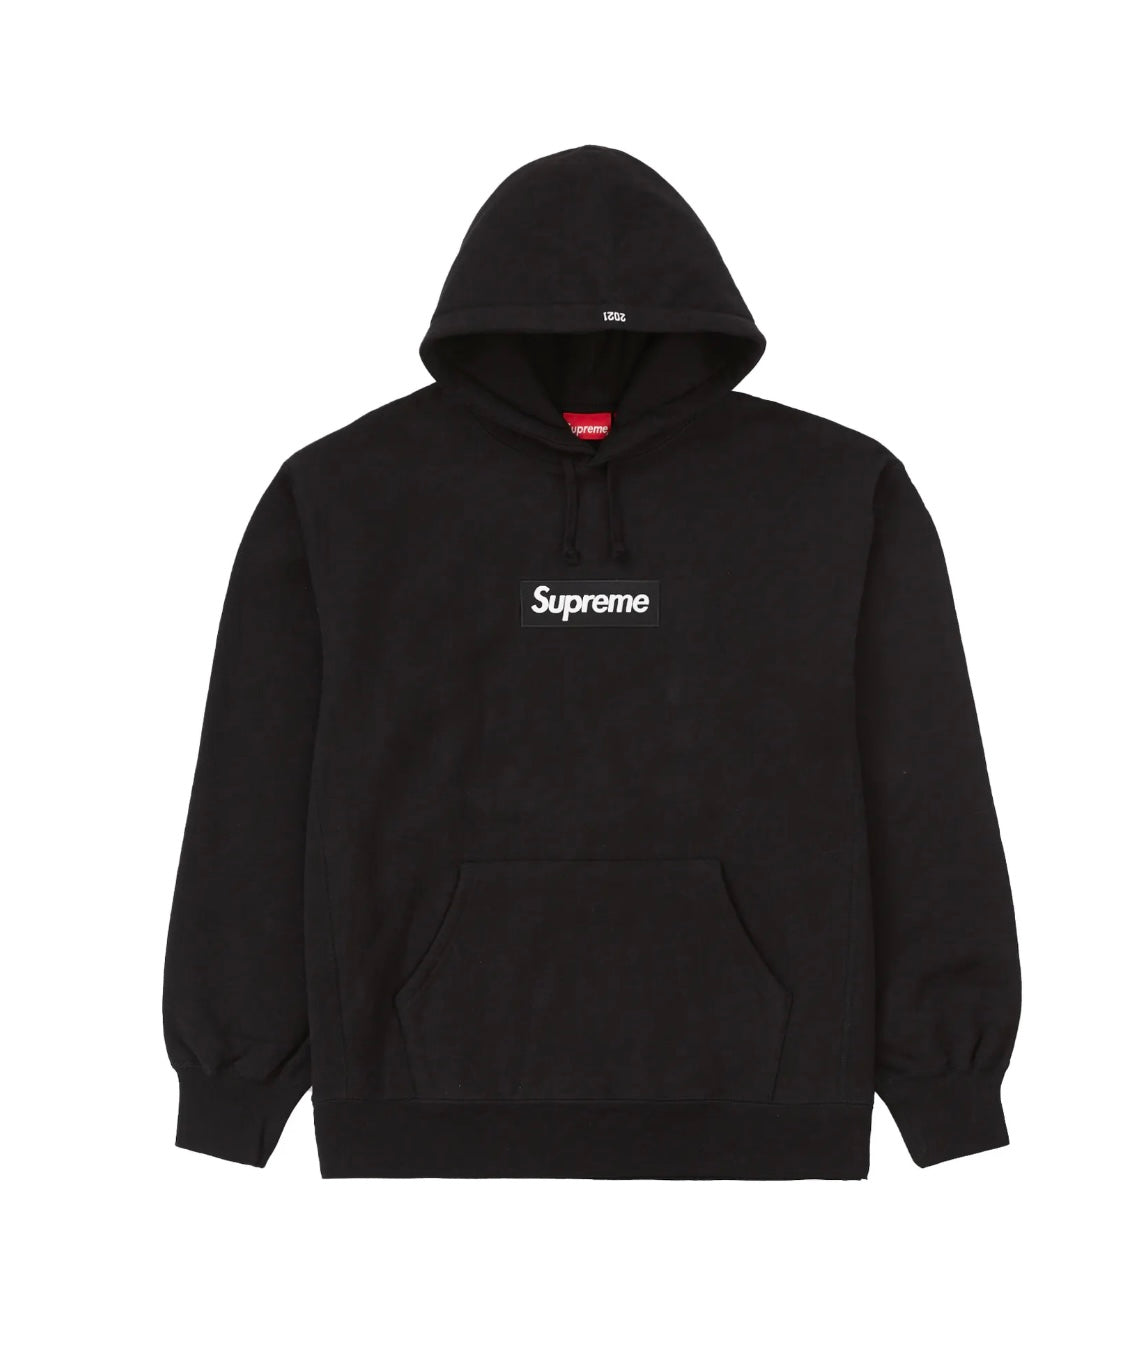 Brand New Supreme Hoodies Available In Store Now